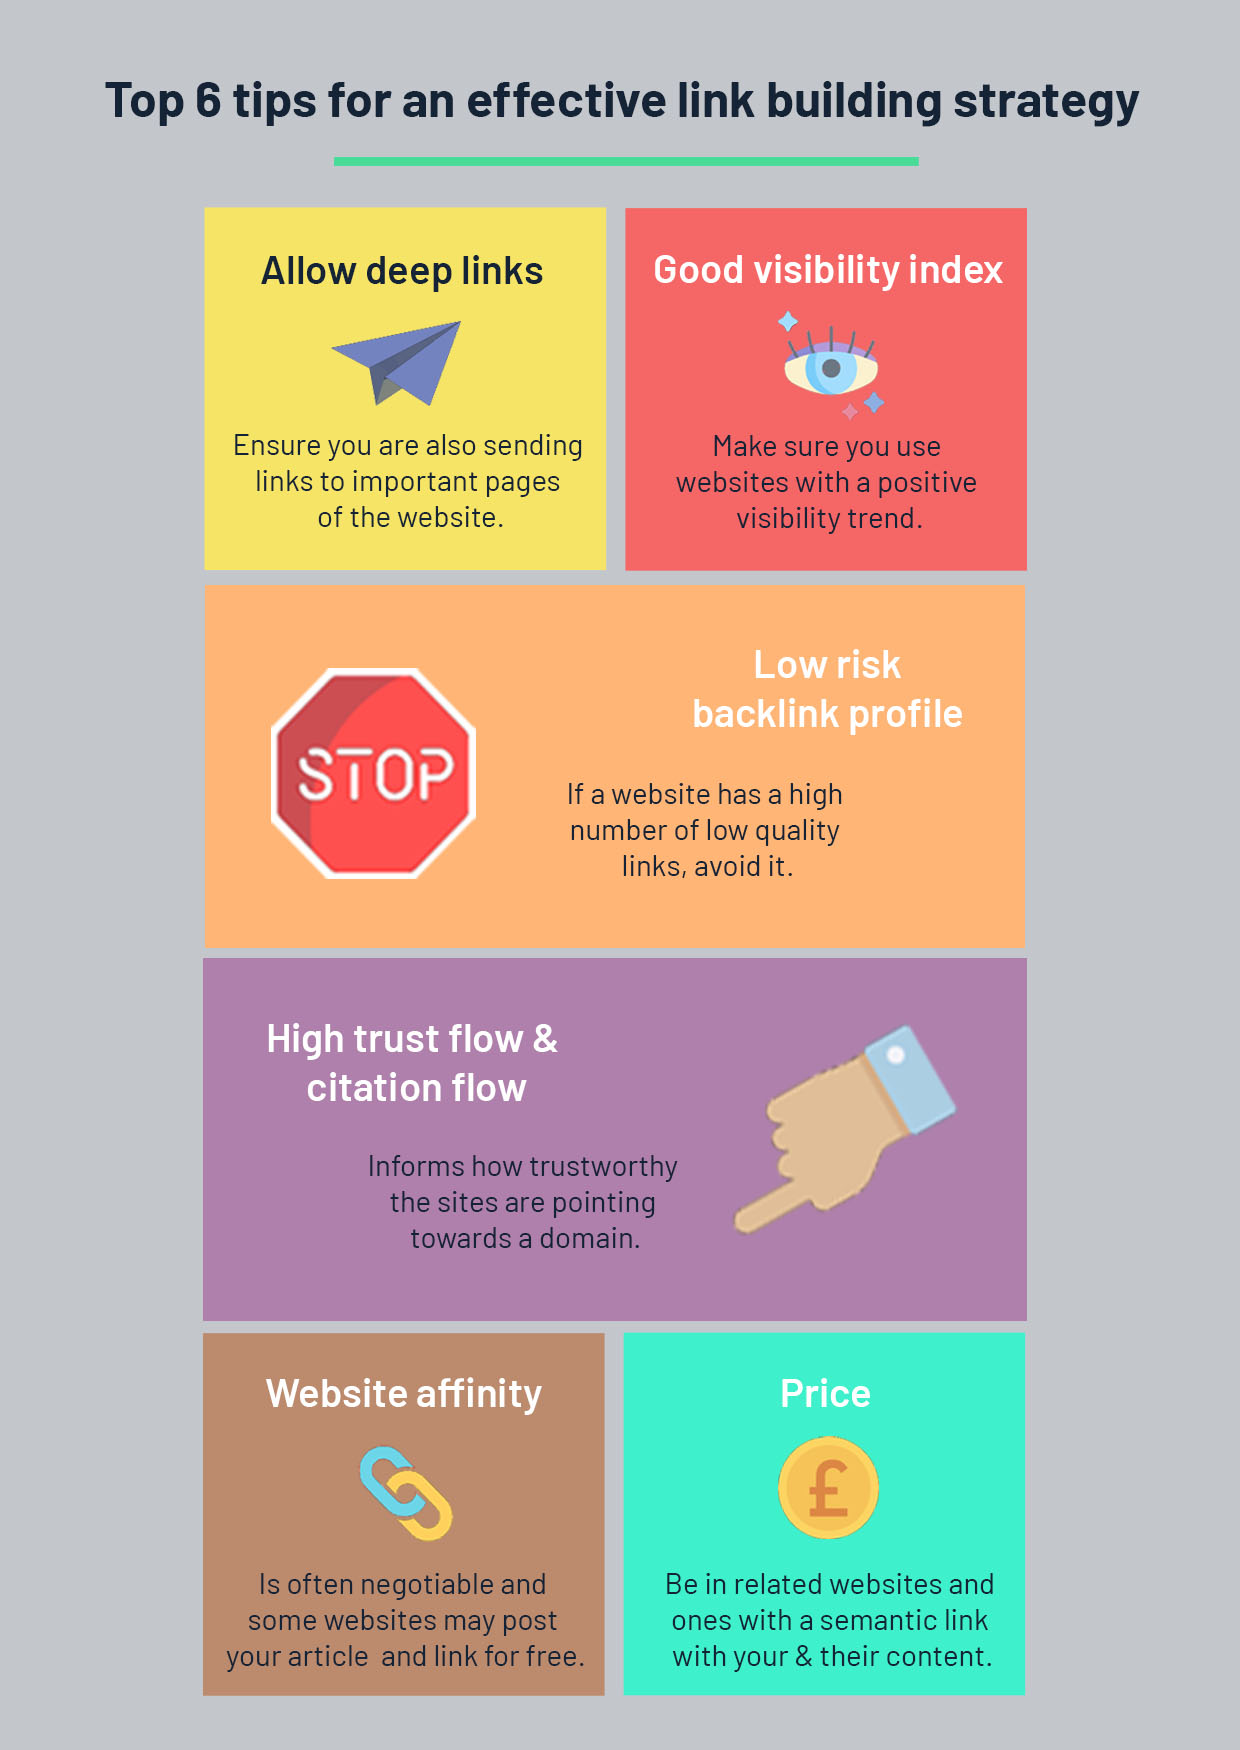 an infographic showing the top 6 tips for an effective link building strategy